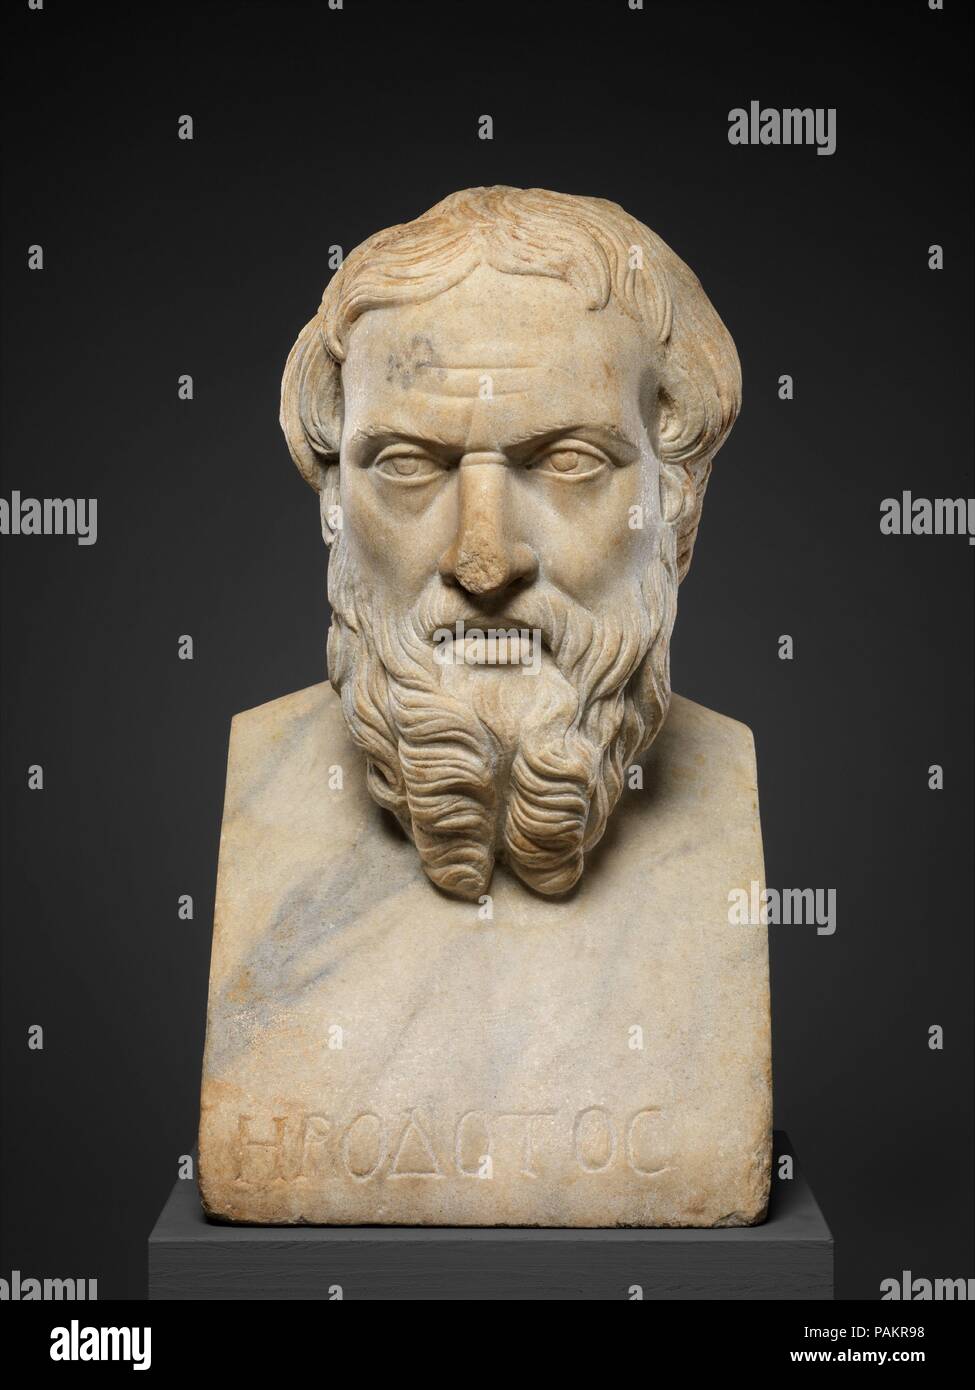 https://c8.alamy.com/comp/PAKR98/marble-bust-of-herodotos-culture-roman-dimensions-h-18-34-in-476-cm-date-2nd-century-ad-copy-of-a-greek-bronze-statue-of-the-first-half-of-the-fourth-century-bc-herodotos-ca-484-424-bc-of-halikarnassos-achieved-fame-in-his-lifetime-for-his-histories-which-chronicle-the-greek-wars-with-persia-in-the-first-quarter-of-the-fifth-century-bc-and-the-years-surrounding-those-momentous-events-his-most-brilliant-and-original-accomplishment-was-his-conception-of-a-narrative-that-interweaves-local-traditions-in-a-span-of-more-than-seventy-years-and-encompasses-much-of-the-world-PAKR98.jpg